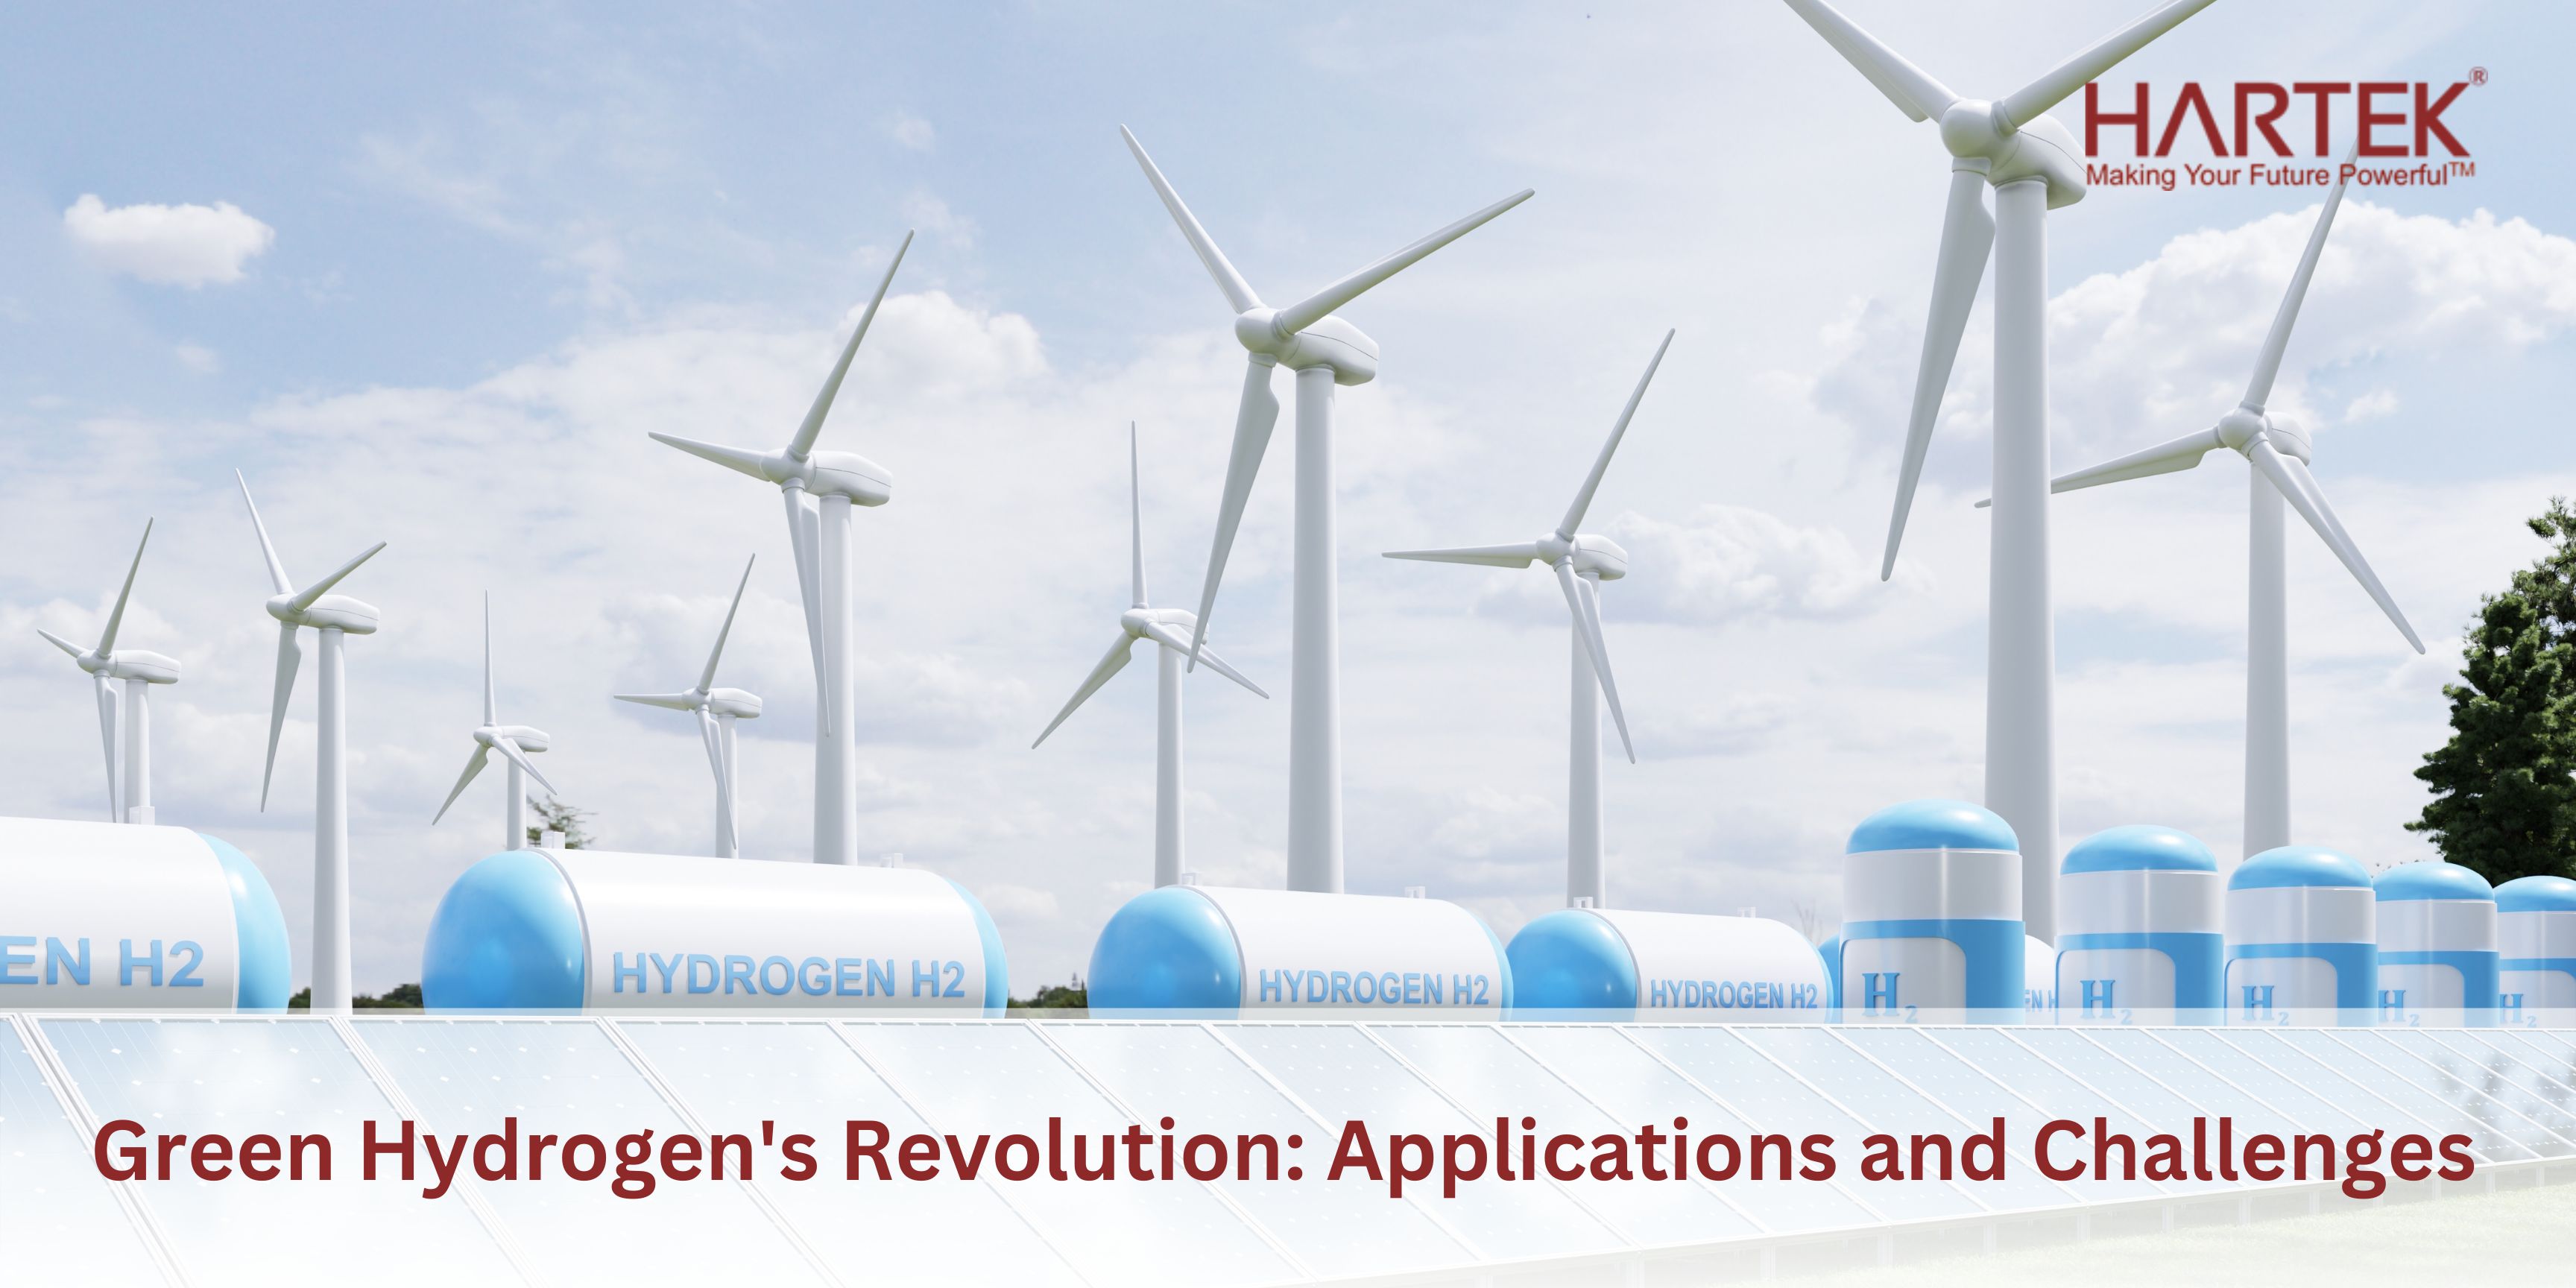 5 Early Applications and Challenges of Green Hydrogen